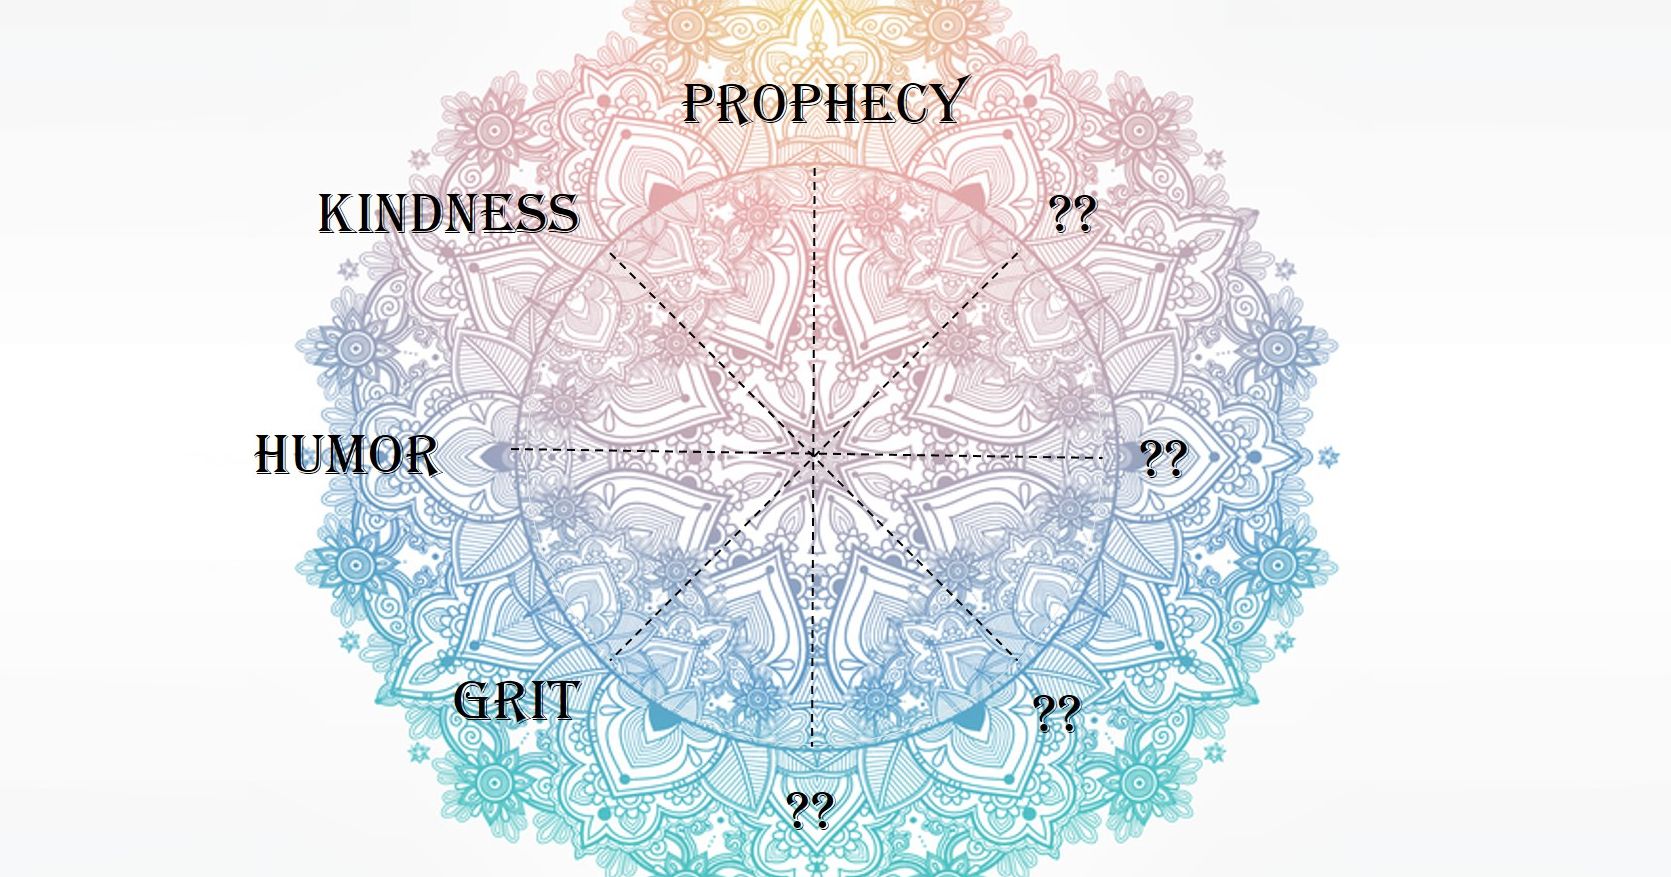 Find Out Your Dominant Personality Trait By Using the Spirituality Wheel